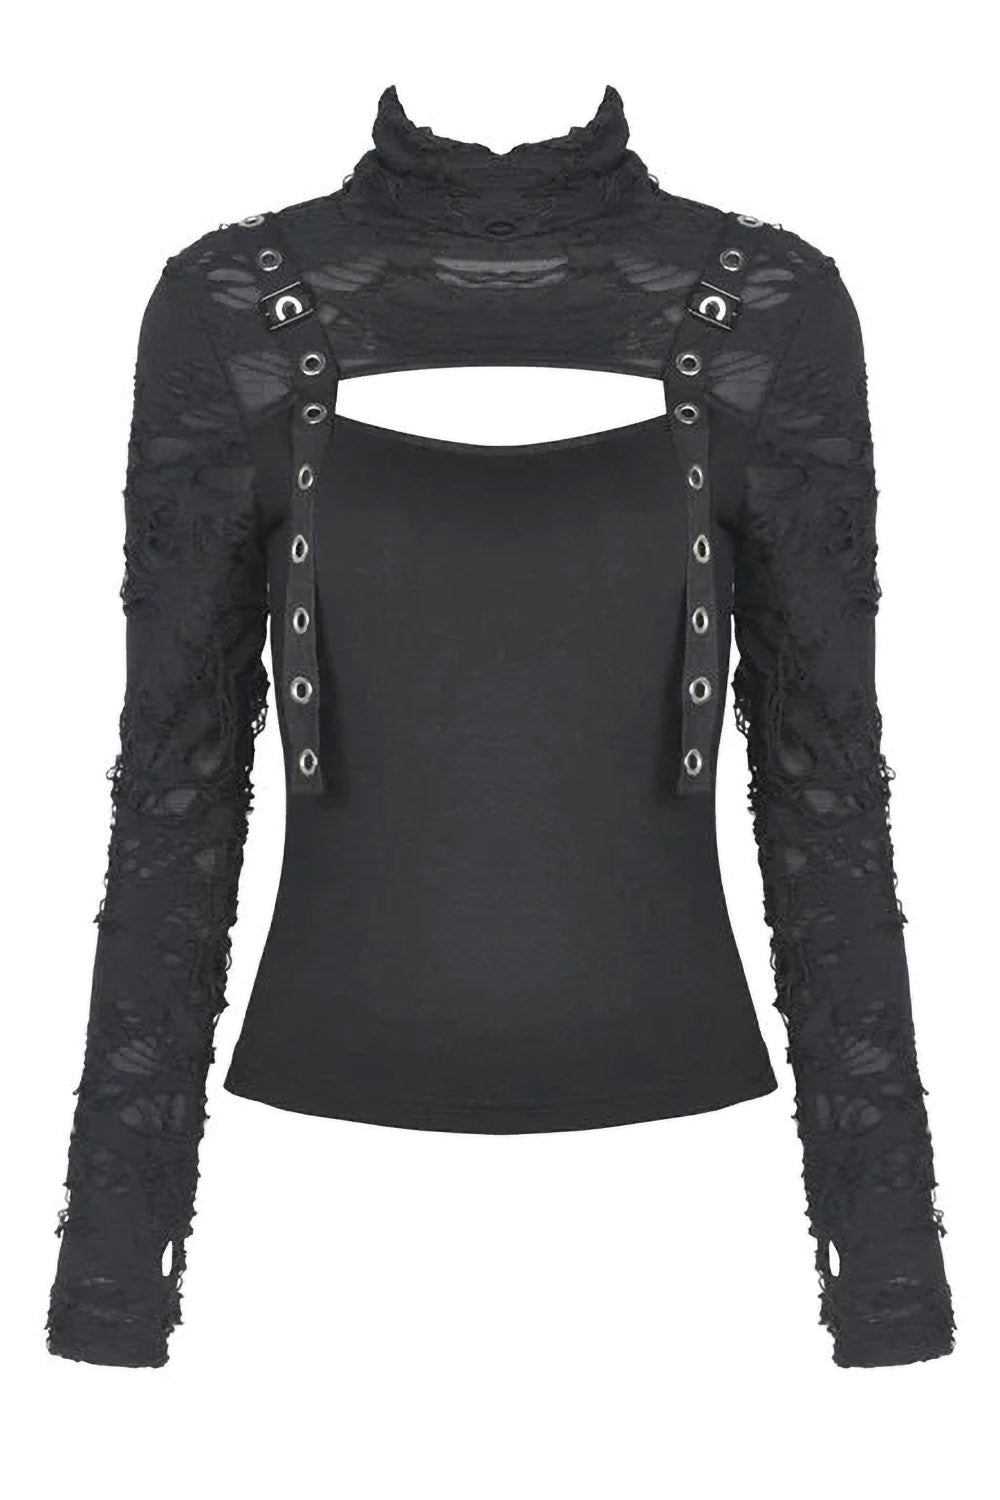 Funeral Crasher Distressed Top